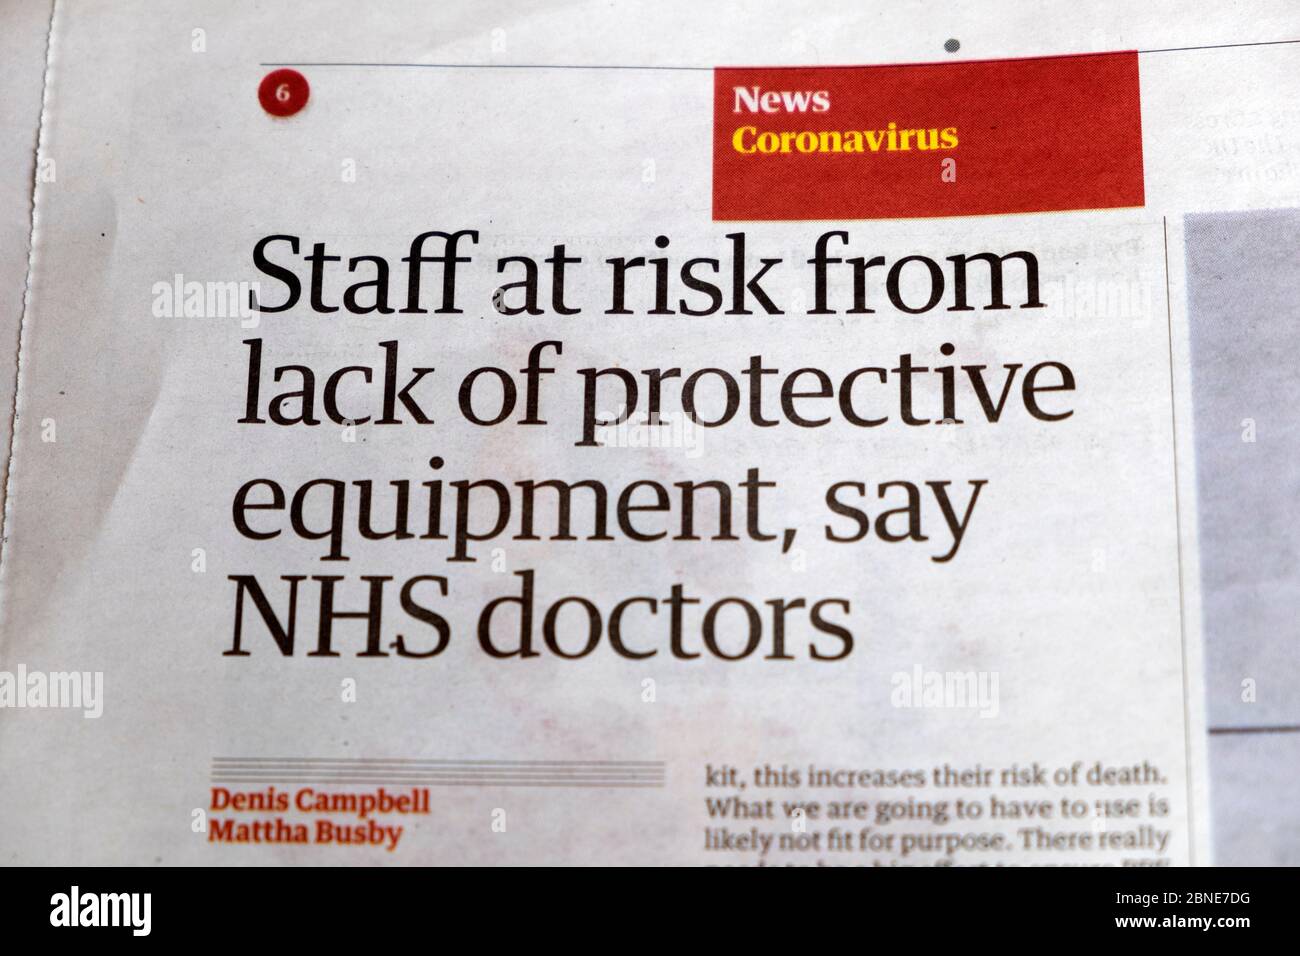 Guardian newspaper inside page coronavirus headline article clipping 'Staff at risk from lack of protective equipment, say NHS doctors'  March 2020 UK Stock Photo